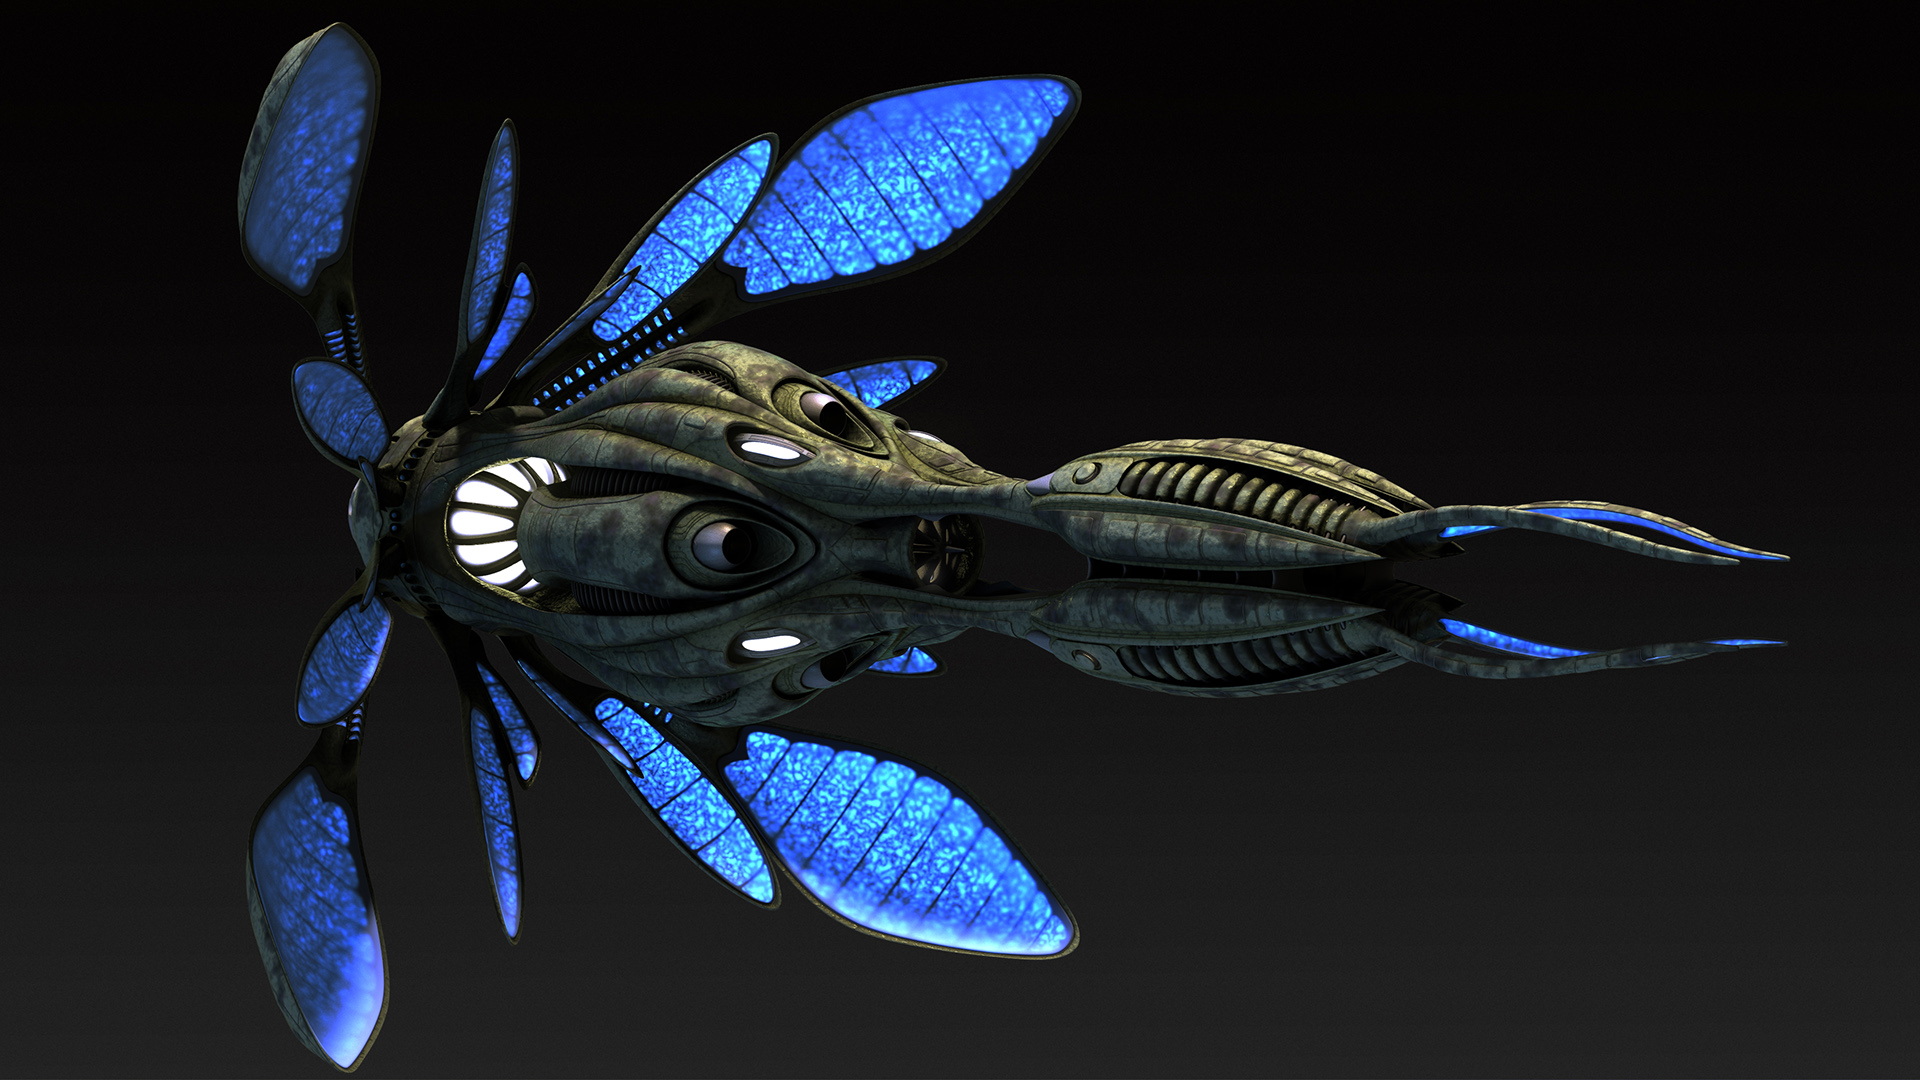 TV Show Babylon 5: A Call to Arms HD Wallpaper | Background Image